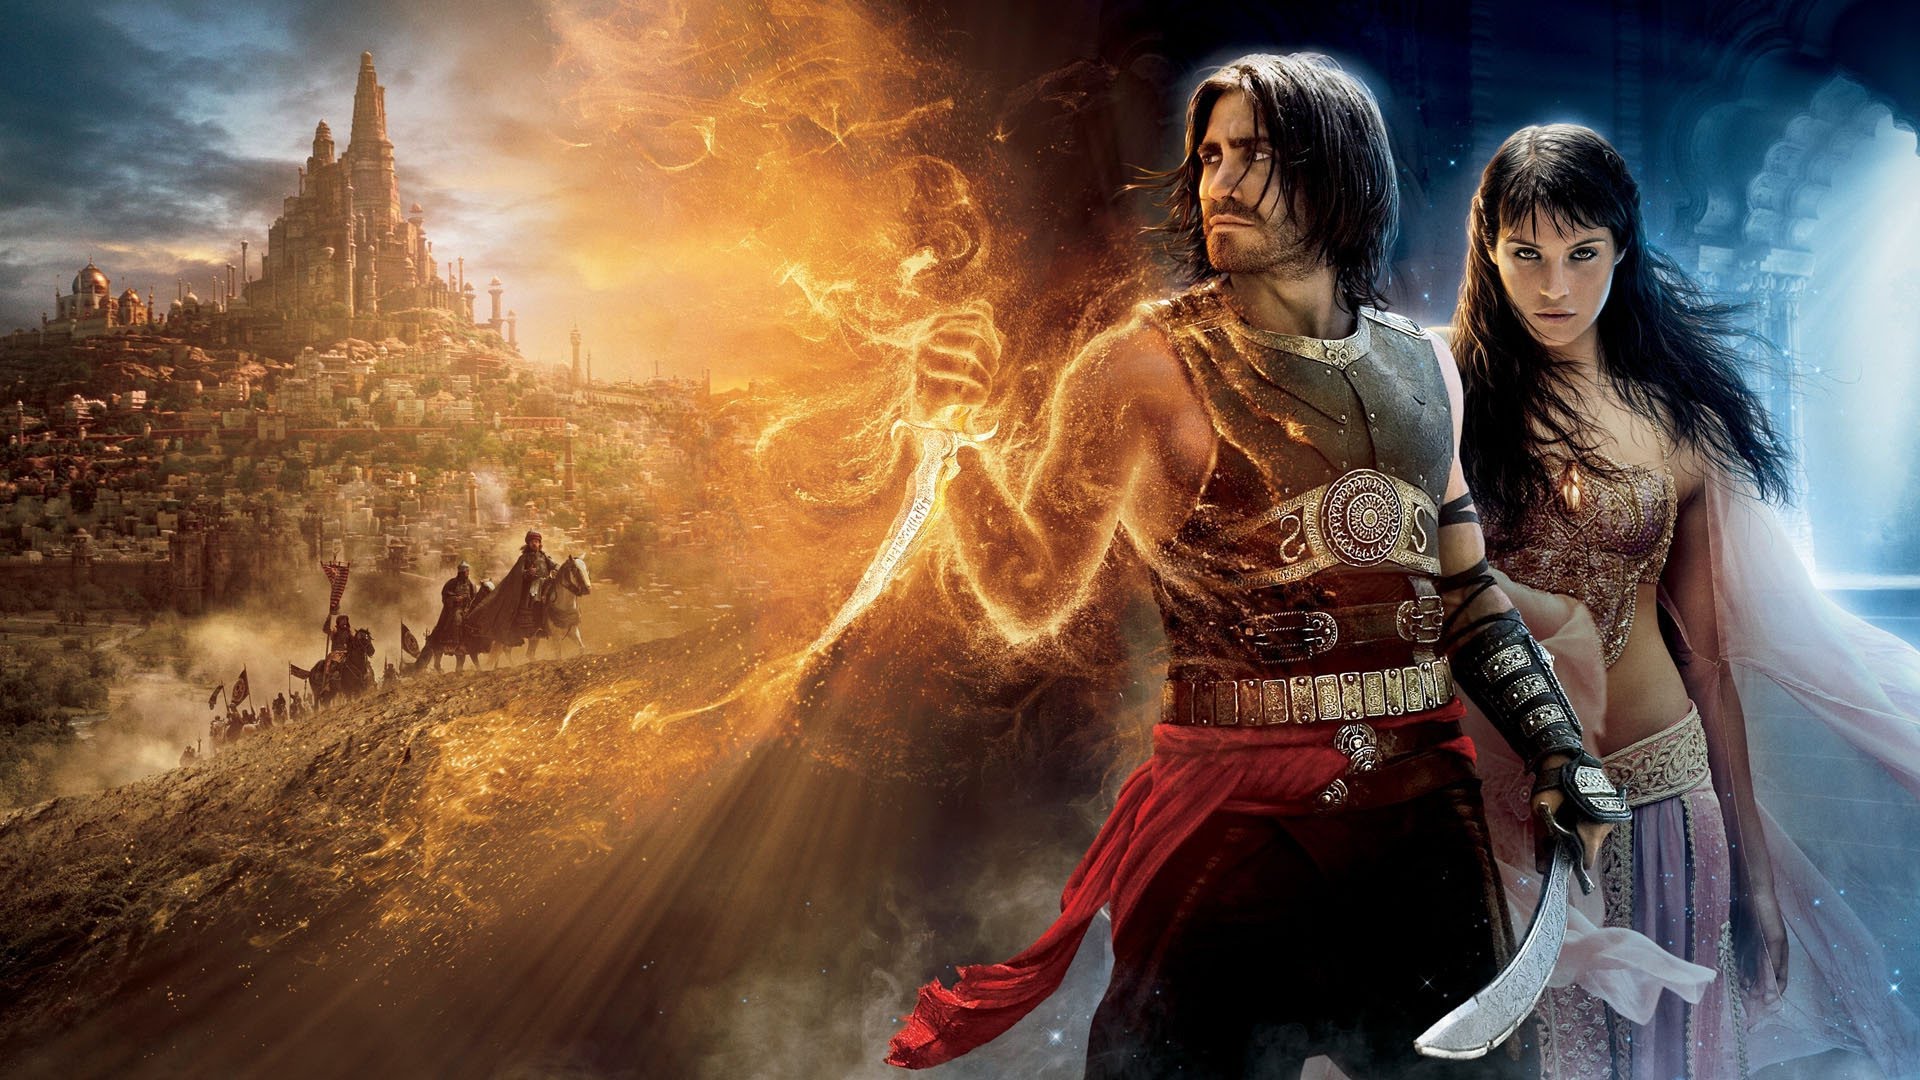 Prince Of Persia: The Sands Of Time HD wallpapers, Desktop wallpaper - most viewed